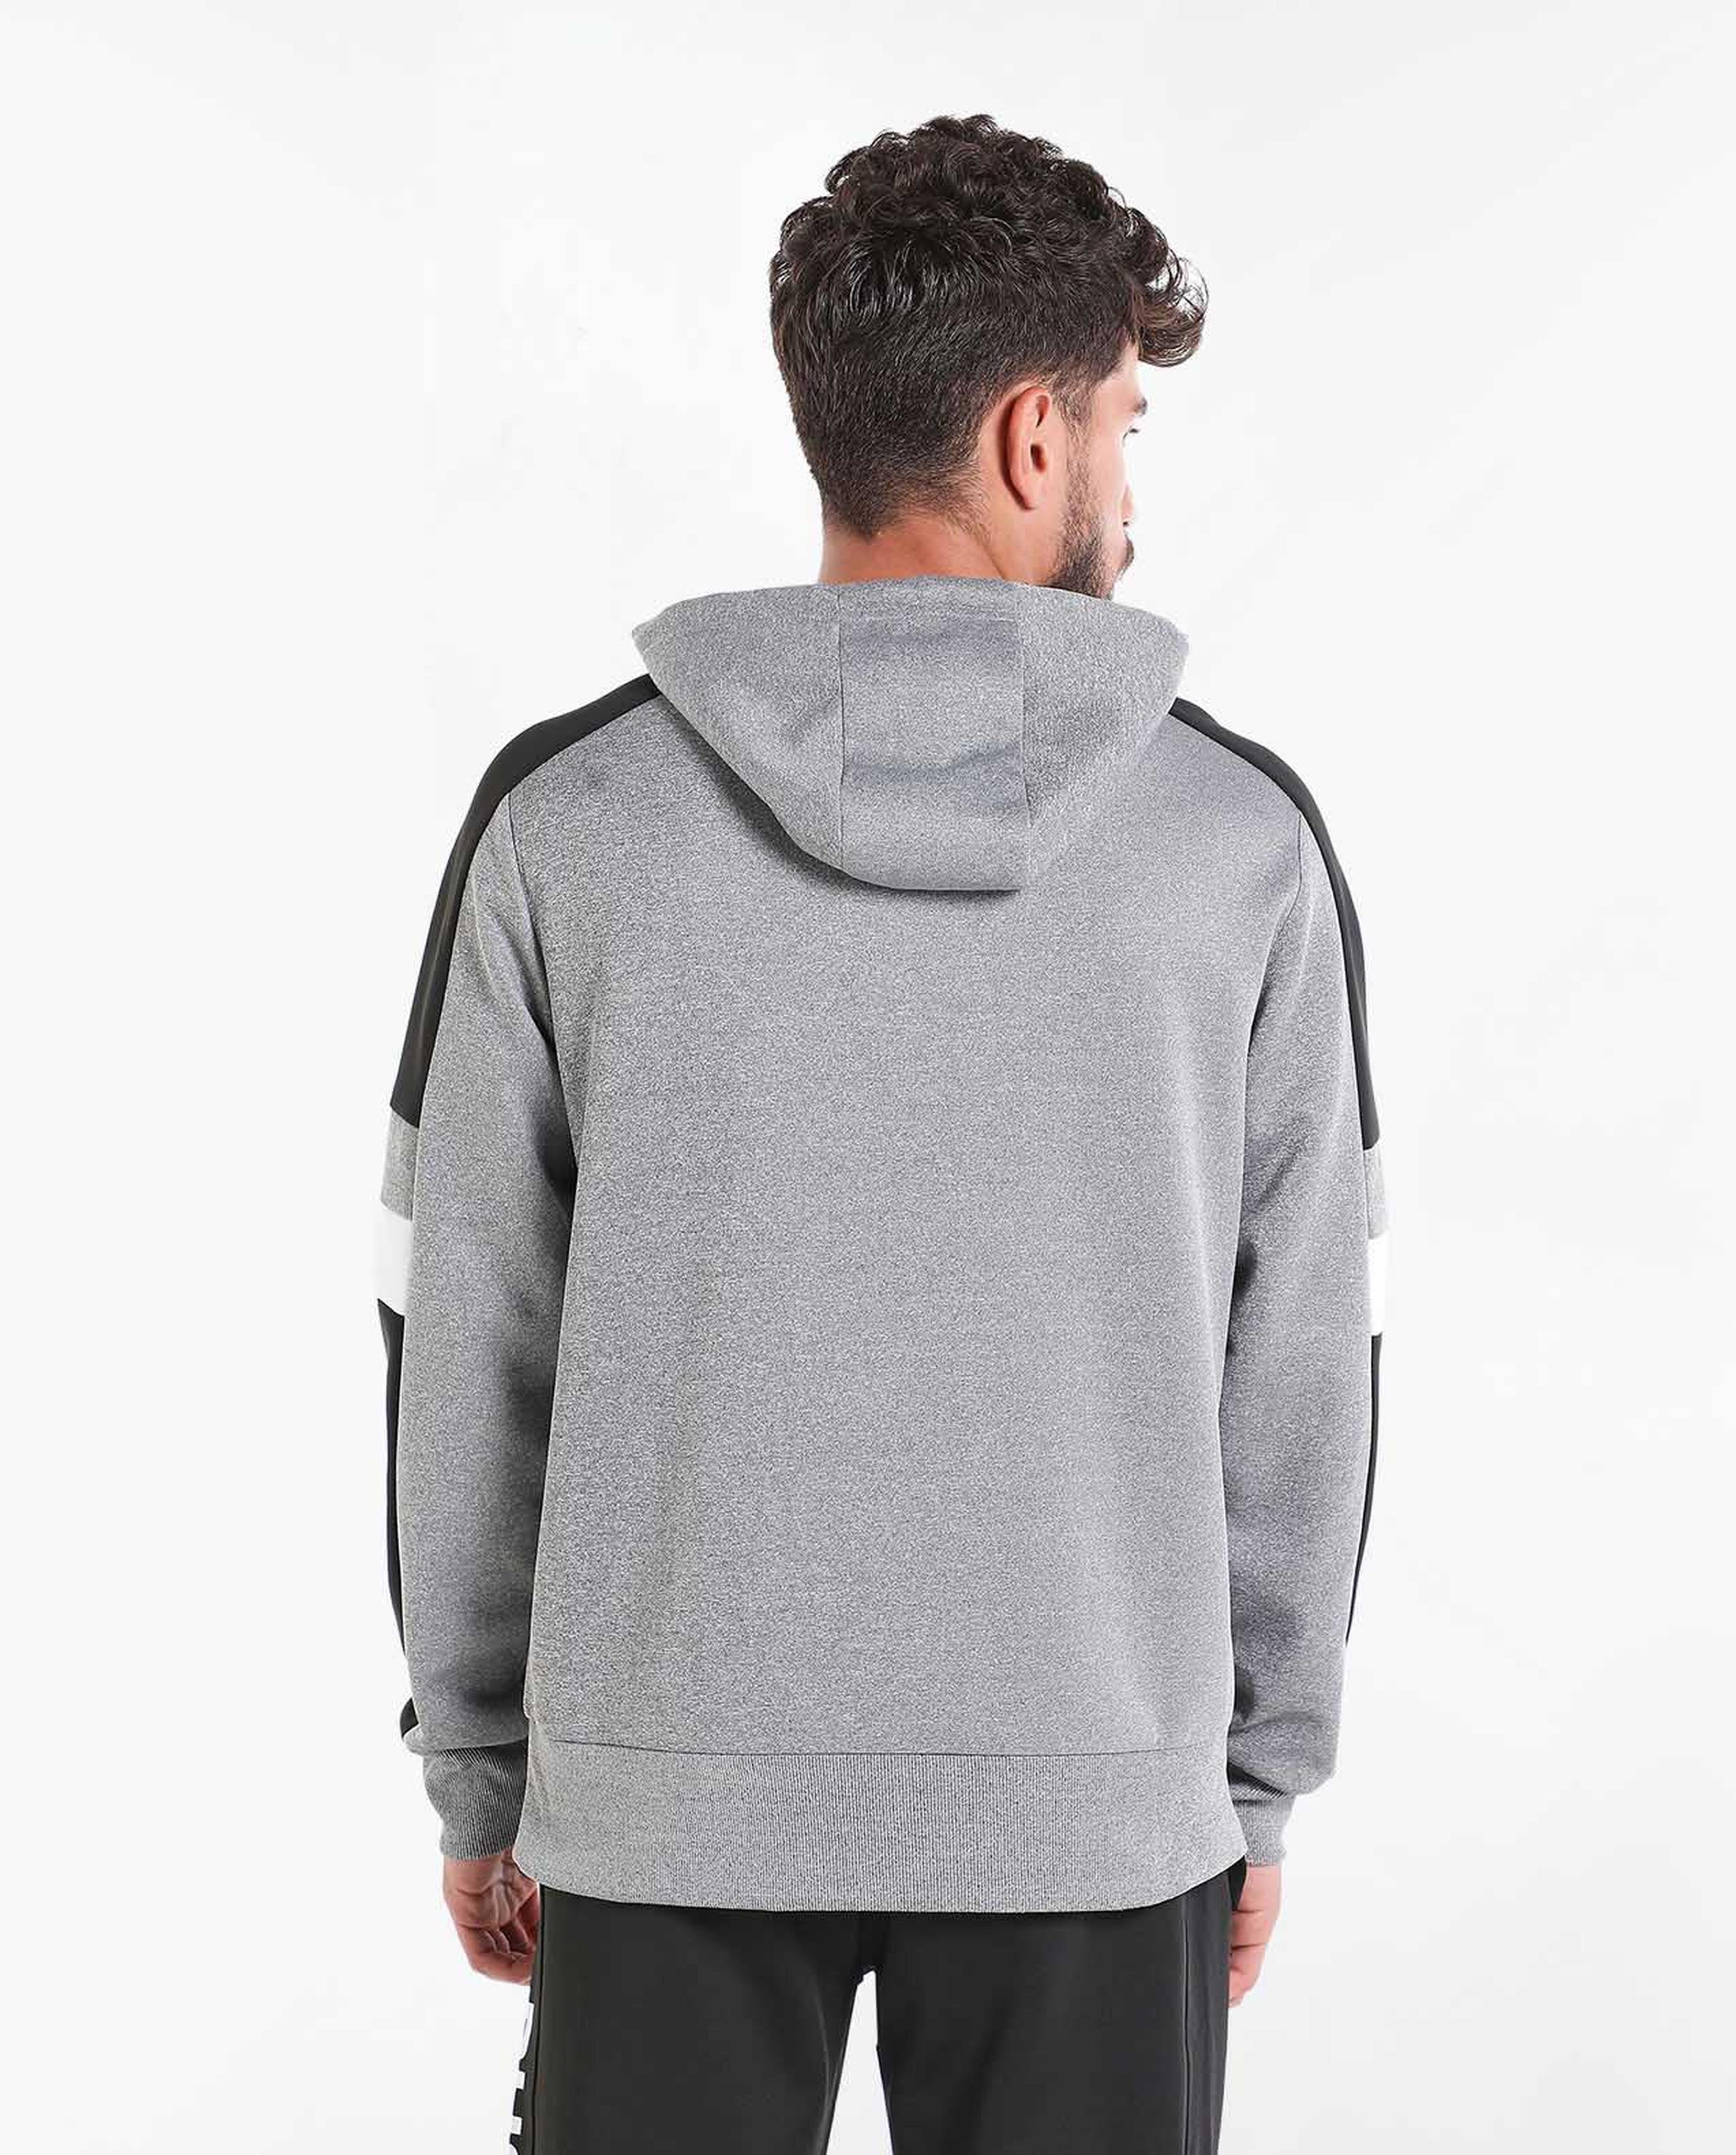 Side Striped Sweatshirt With Hooded Neck And Long Sleeves